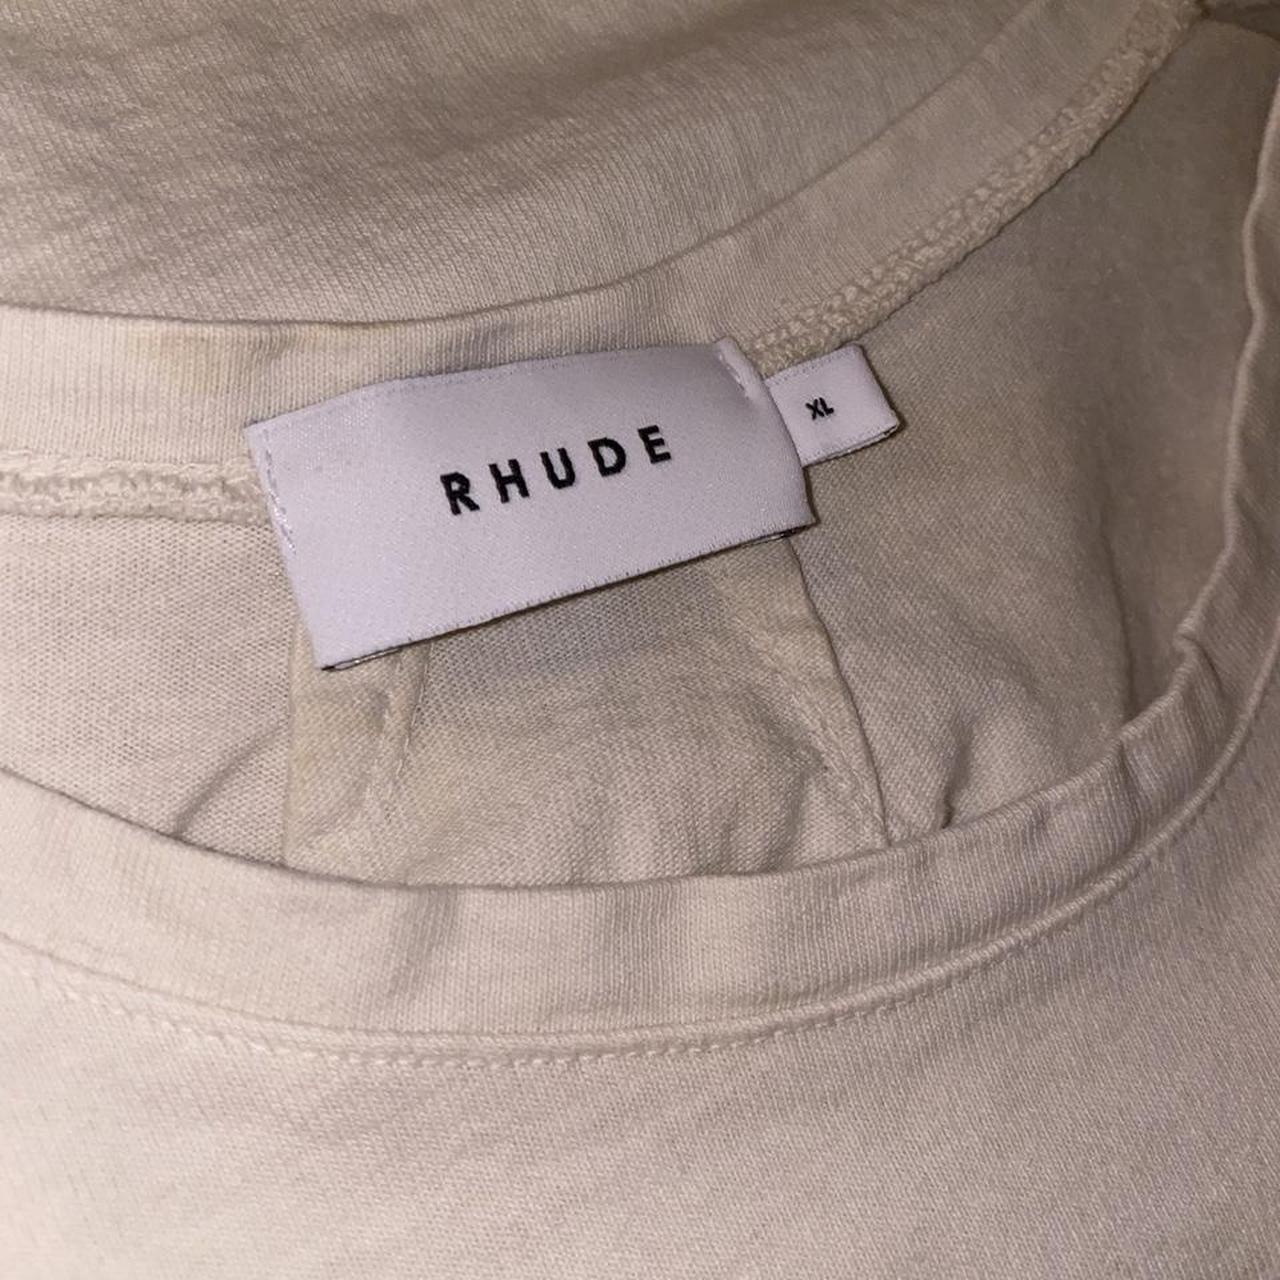 Product Image 4 - Vintage Rhude Mountain Tee🤍💛
This is